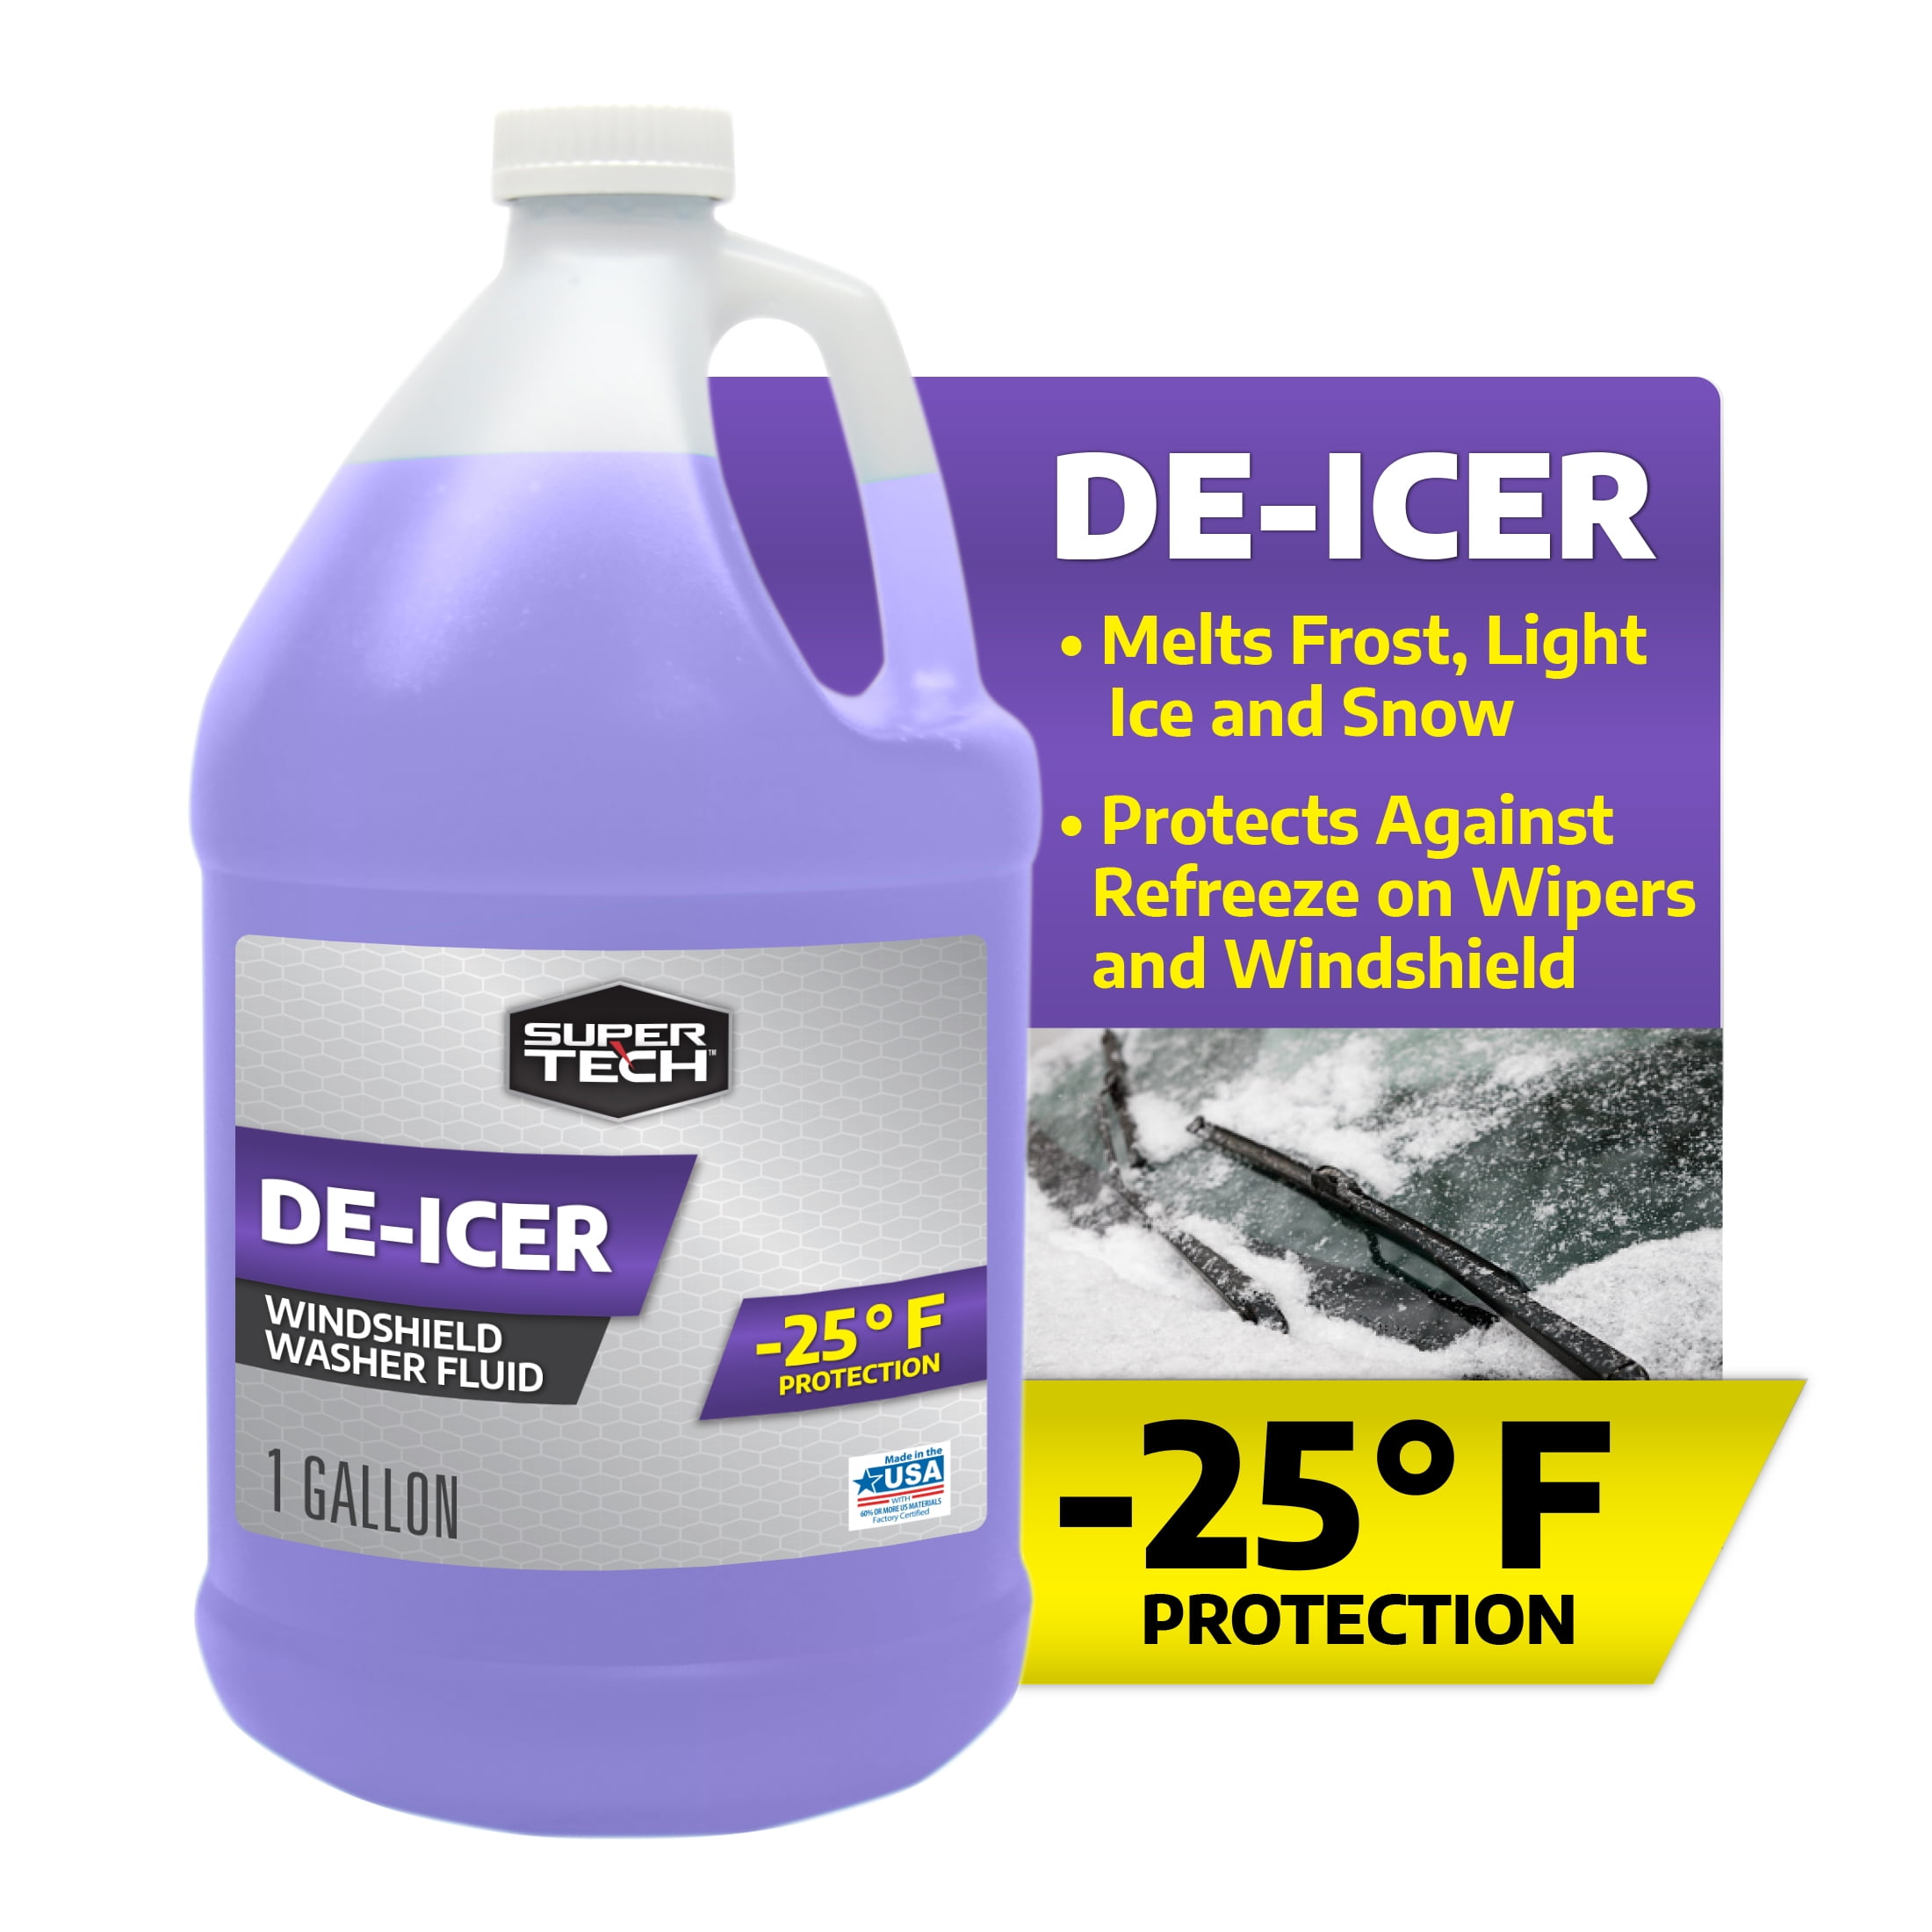  Home Garden De-Icer Windshield Washer Fluid, Greater Driving  Visibility, 6 Gallon (-30° F) (PK Windshield De-Icer) : Automotive